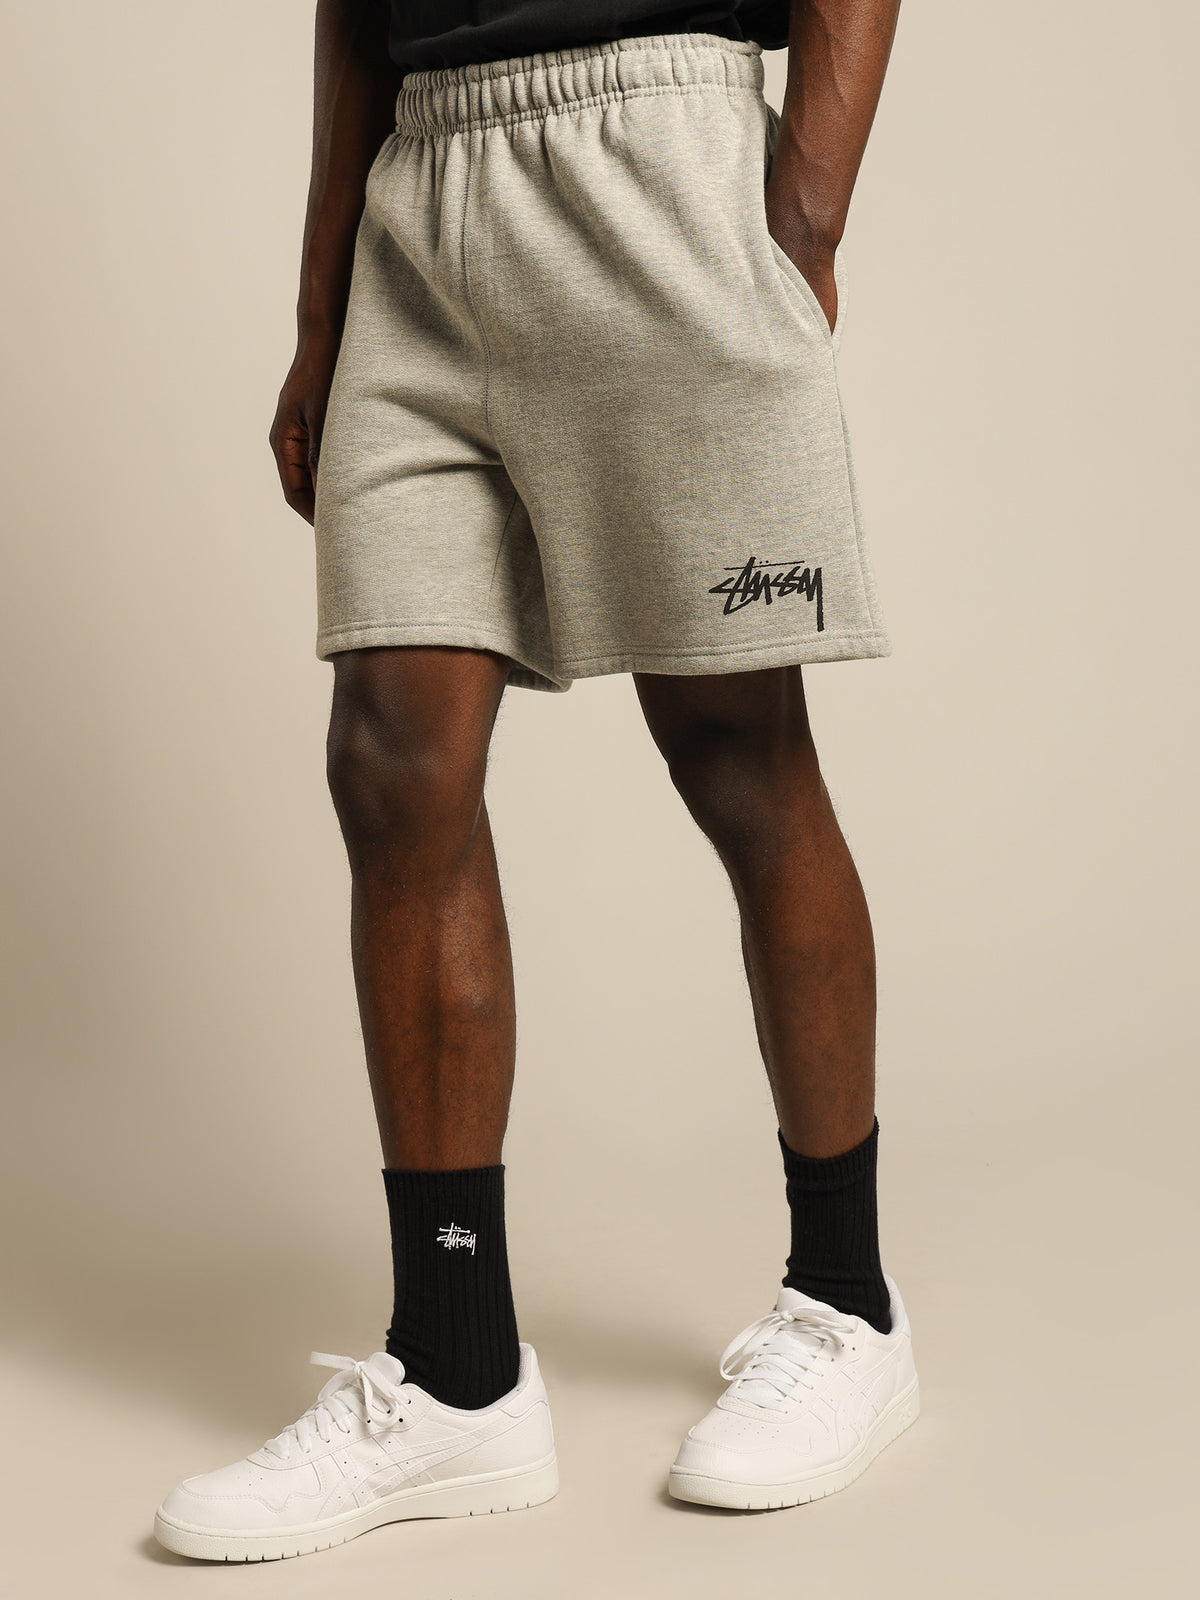 Stock Terry 50/50 Shorts in Grey Marle